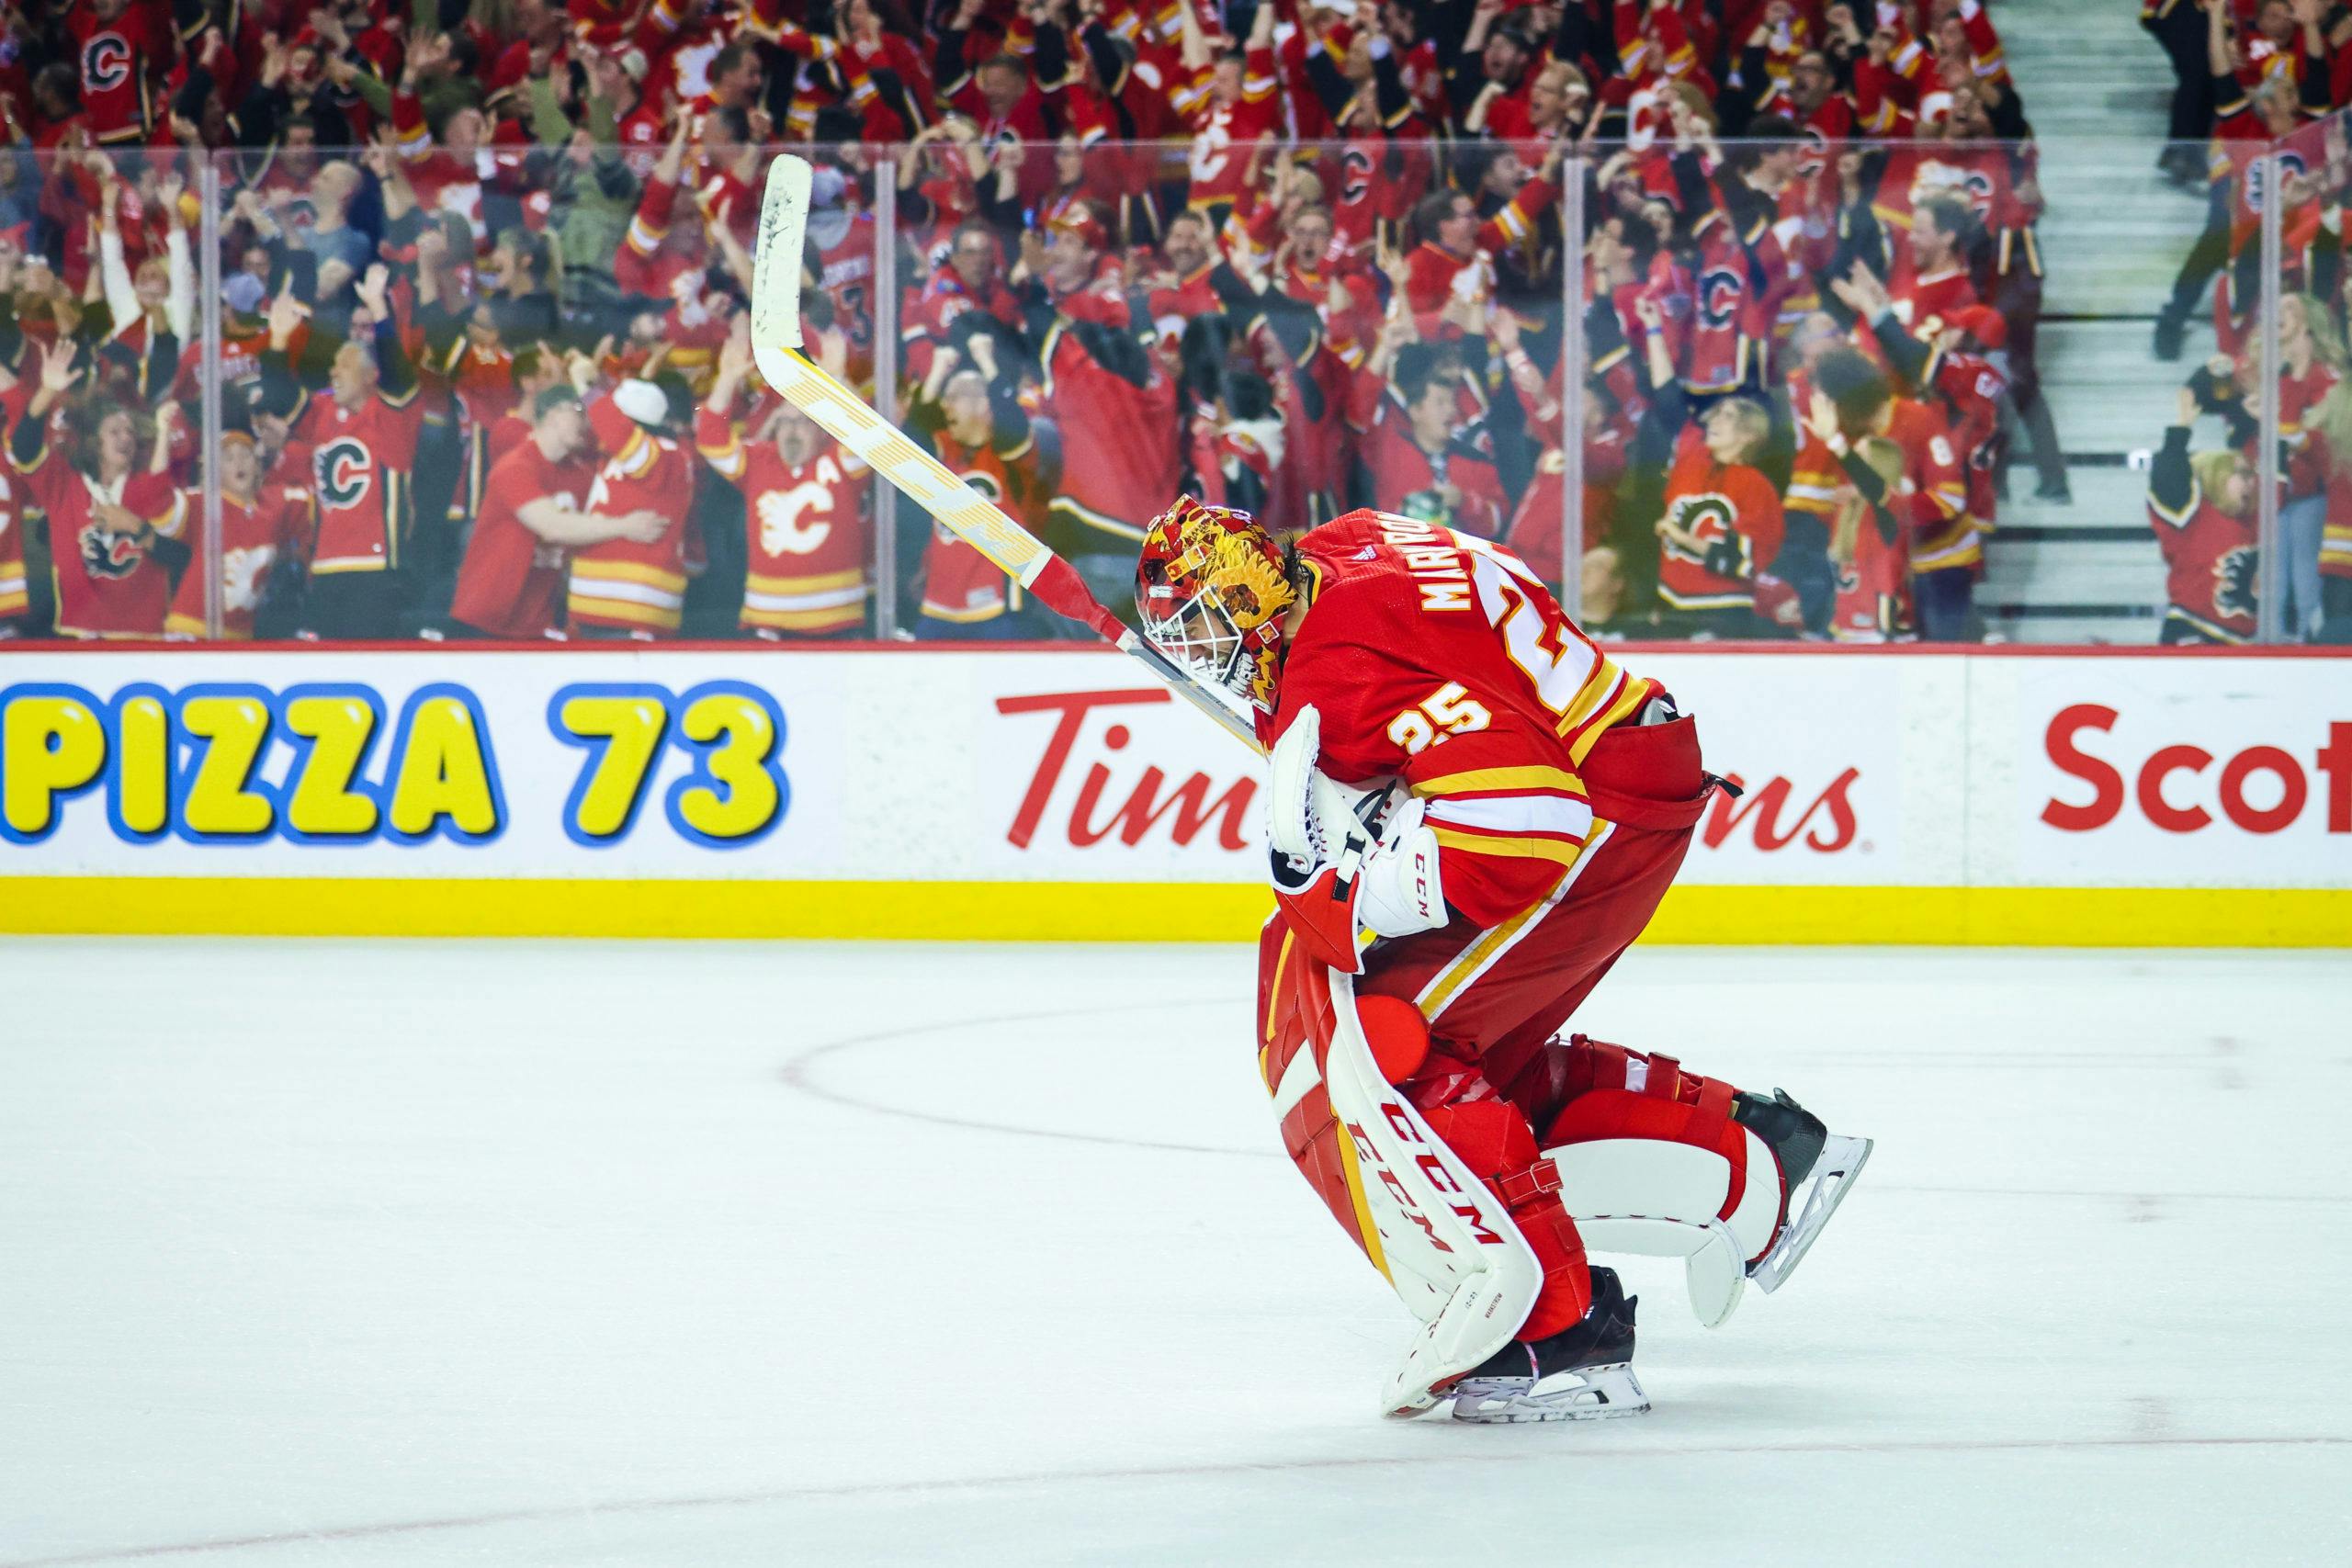 Jacob Markstrom Earns Shutout, Flames Get First Win With 3-0 Victory Over  Detroit - Matchsticks and Gasoline